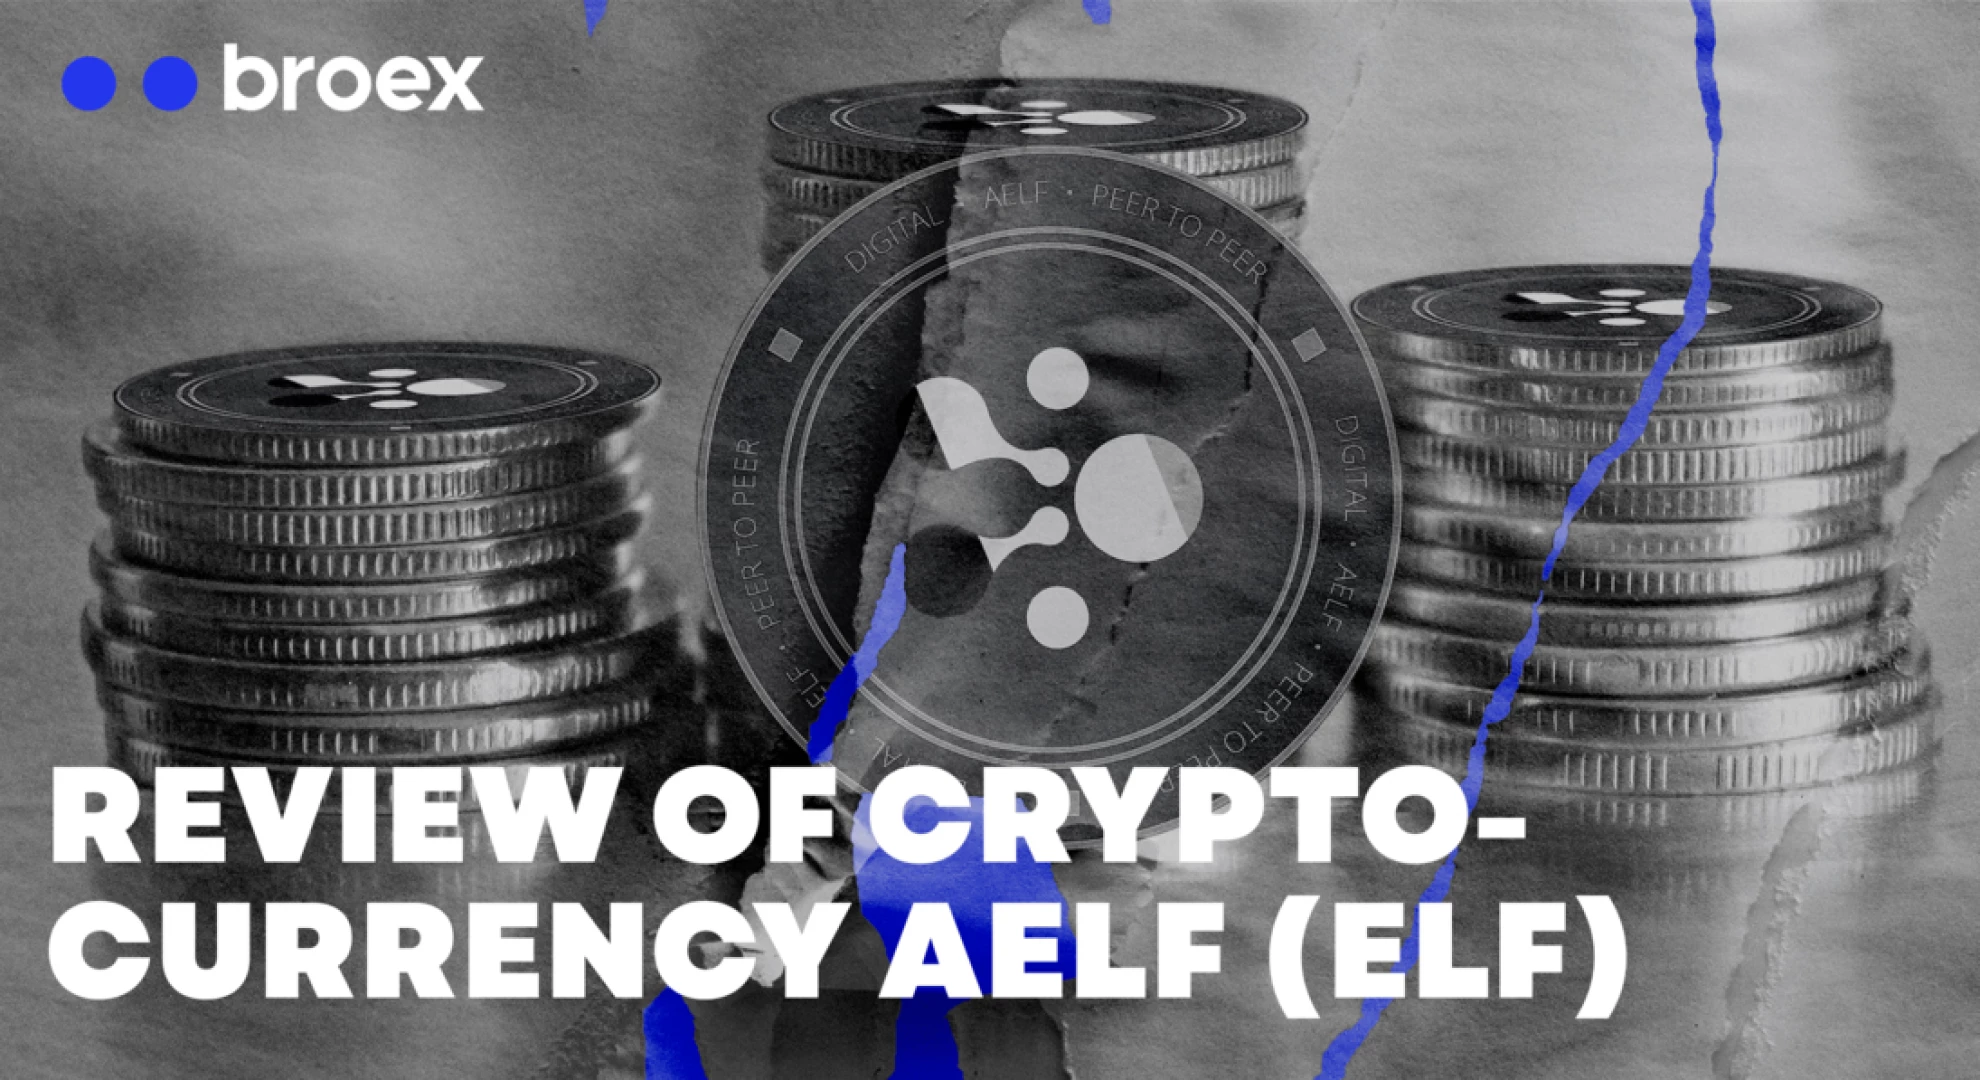 Review of cryptocurrency Aelf (ELF): prospects, how to buy quickly and easily